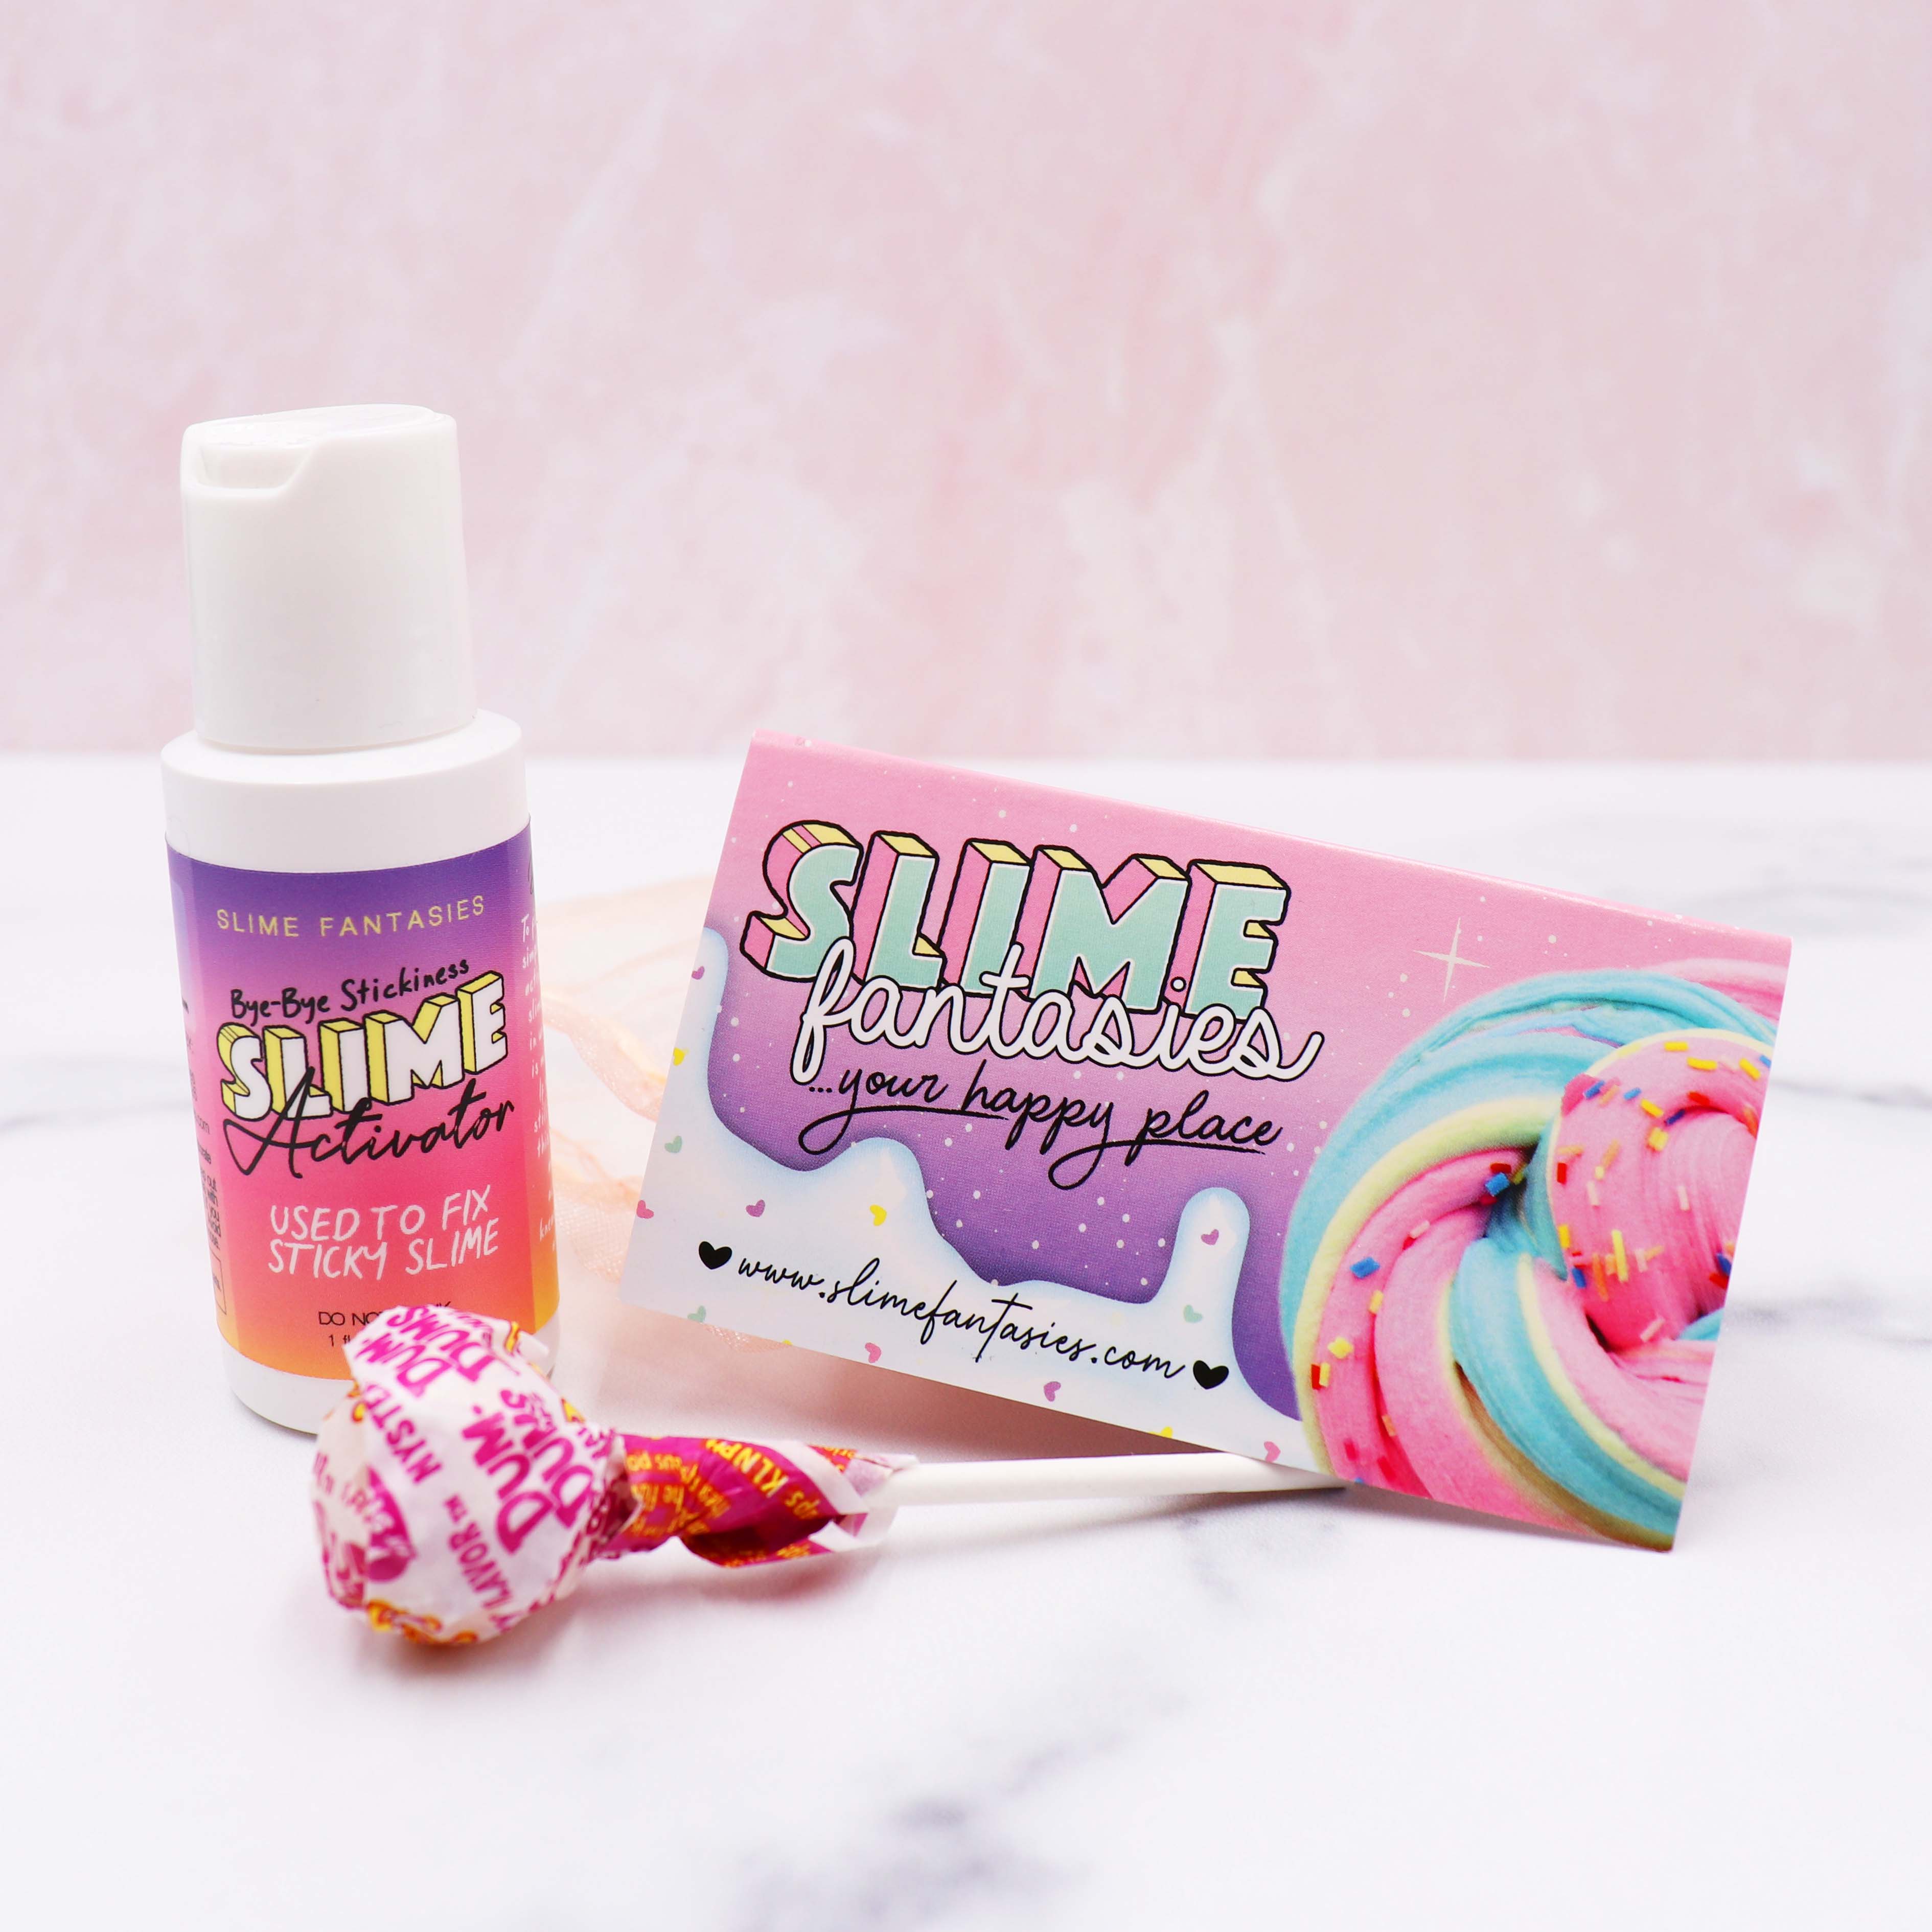 Slime Care Package Activator Candy Care Instructions Slime Fantasies Shop Unboxed